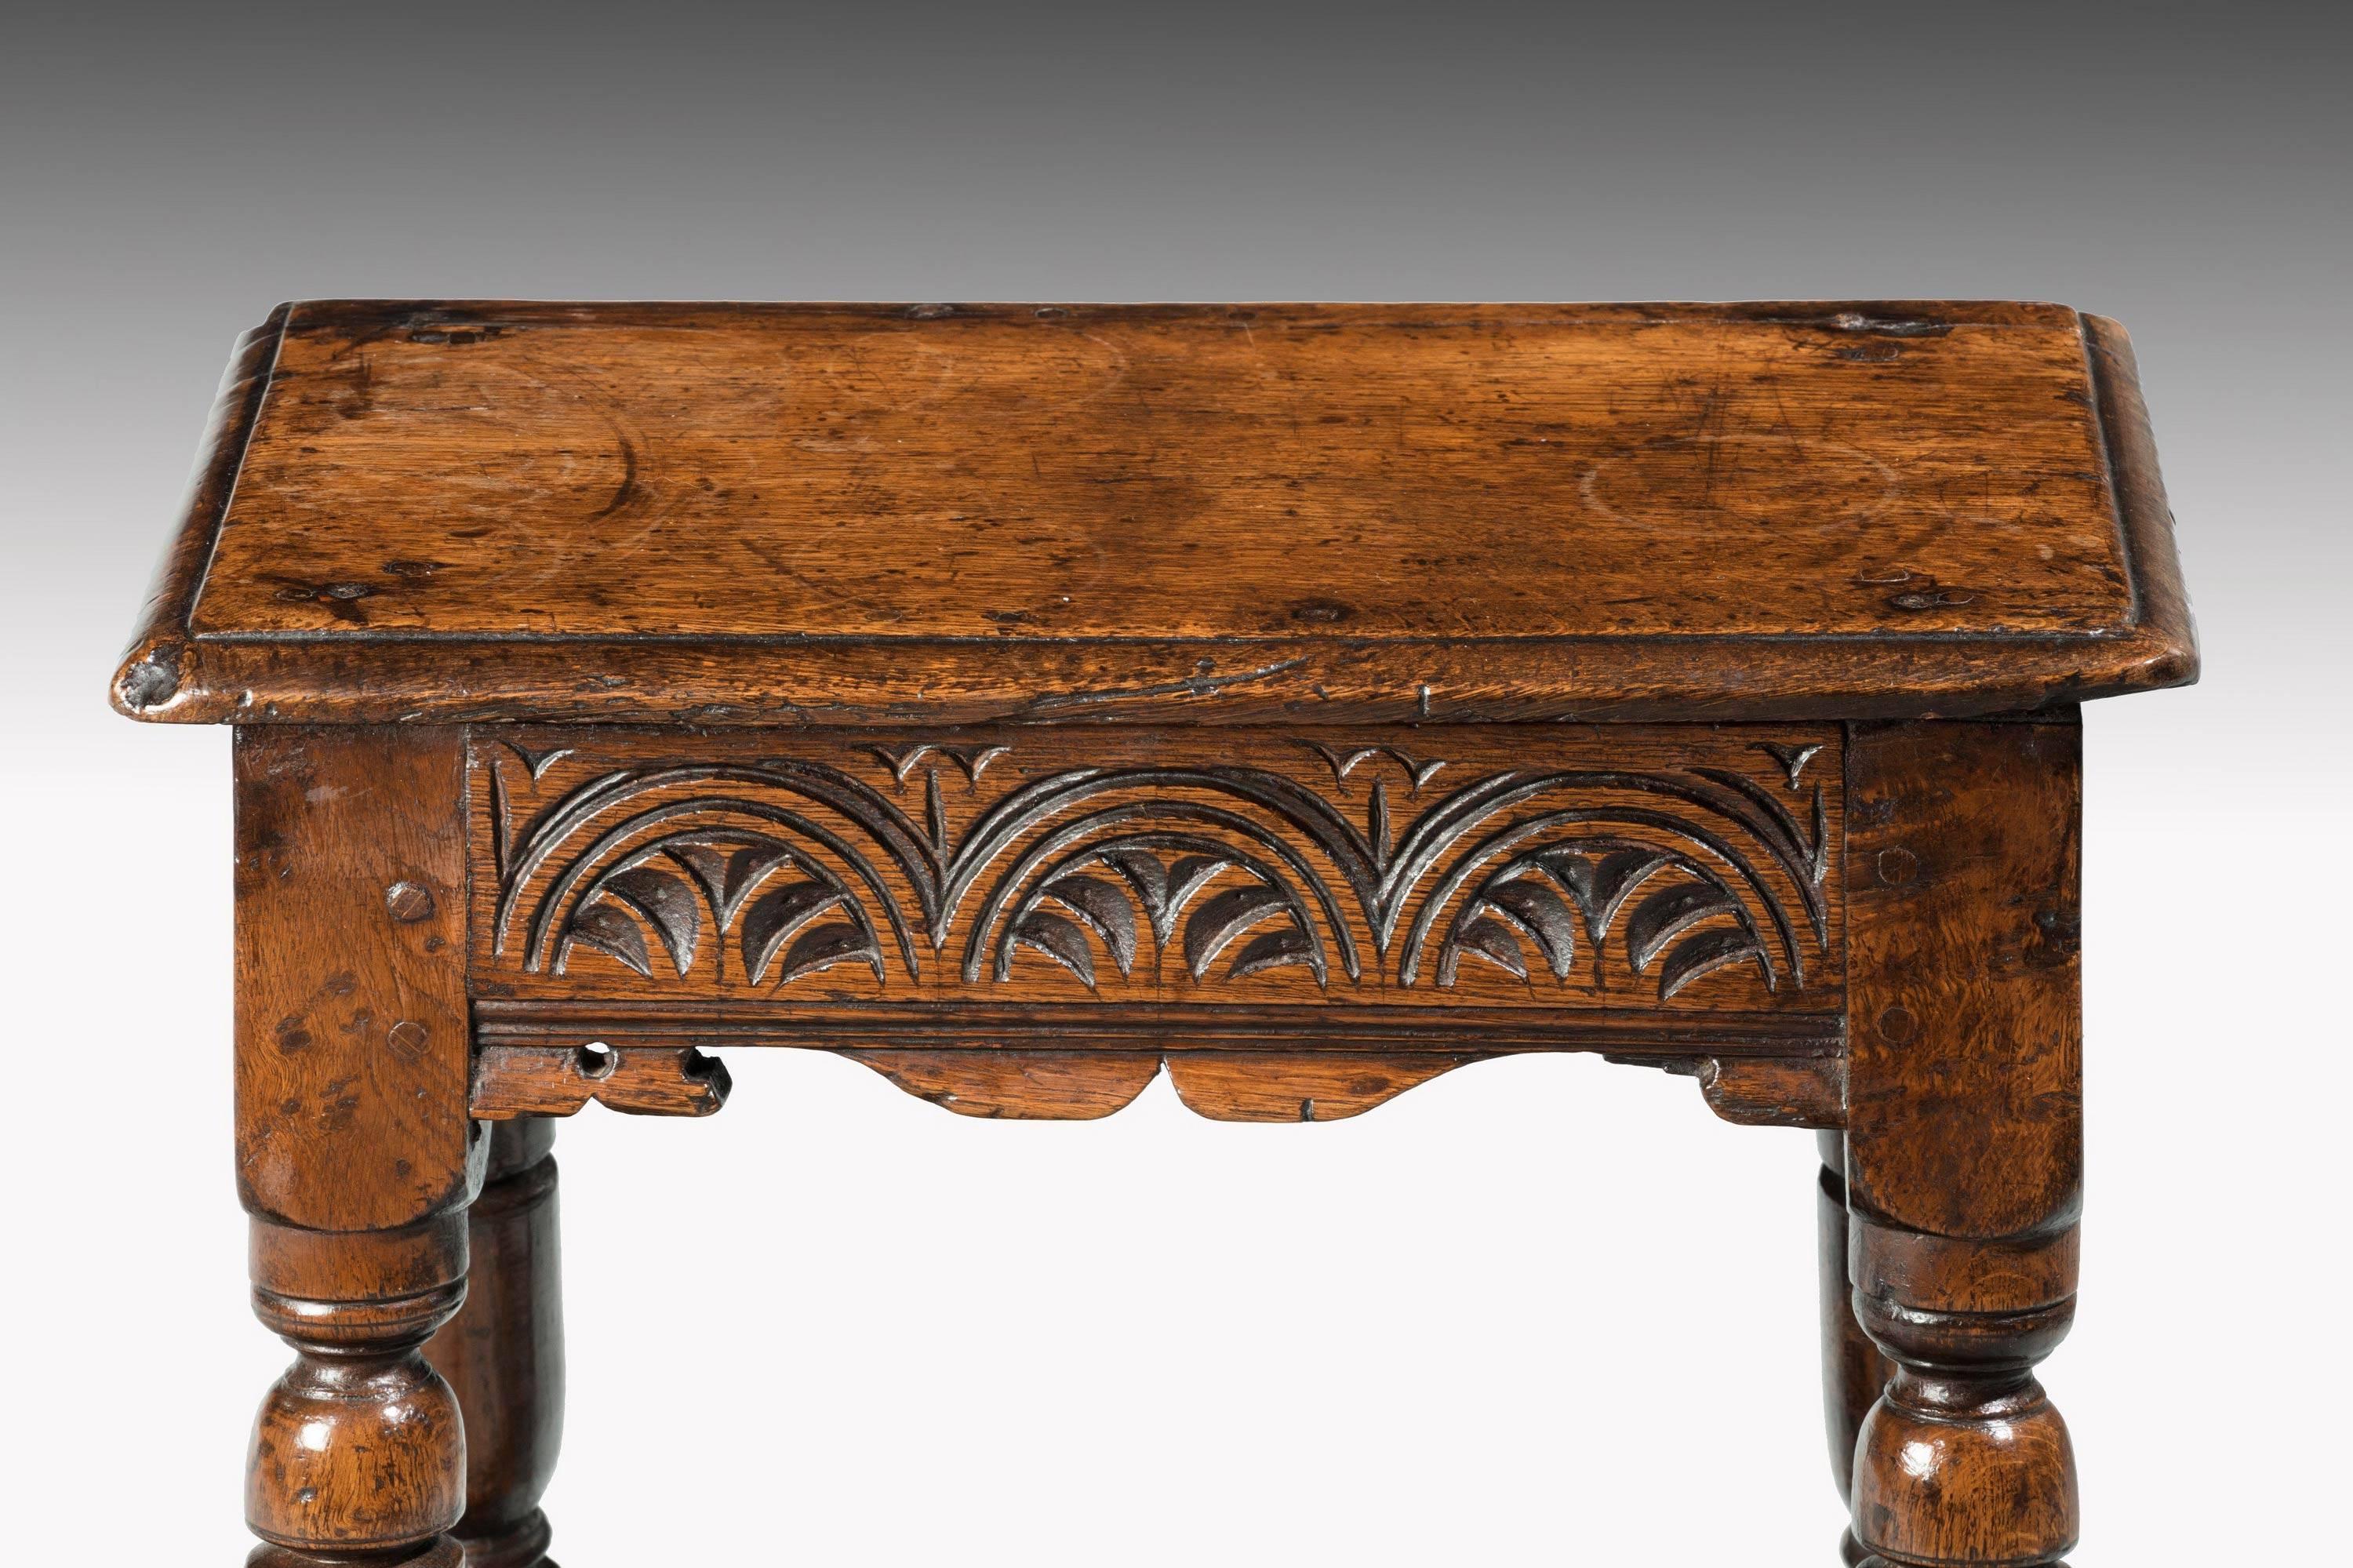 An early 18th century oak joint stool of considerable construction, with carved arcaded top. The cross stretchers on the base replaced many, many years ago. Good overall colour and patina

N

Joint stools are the seating options that come